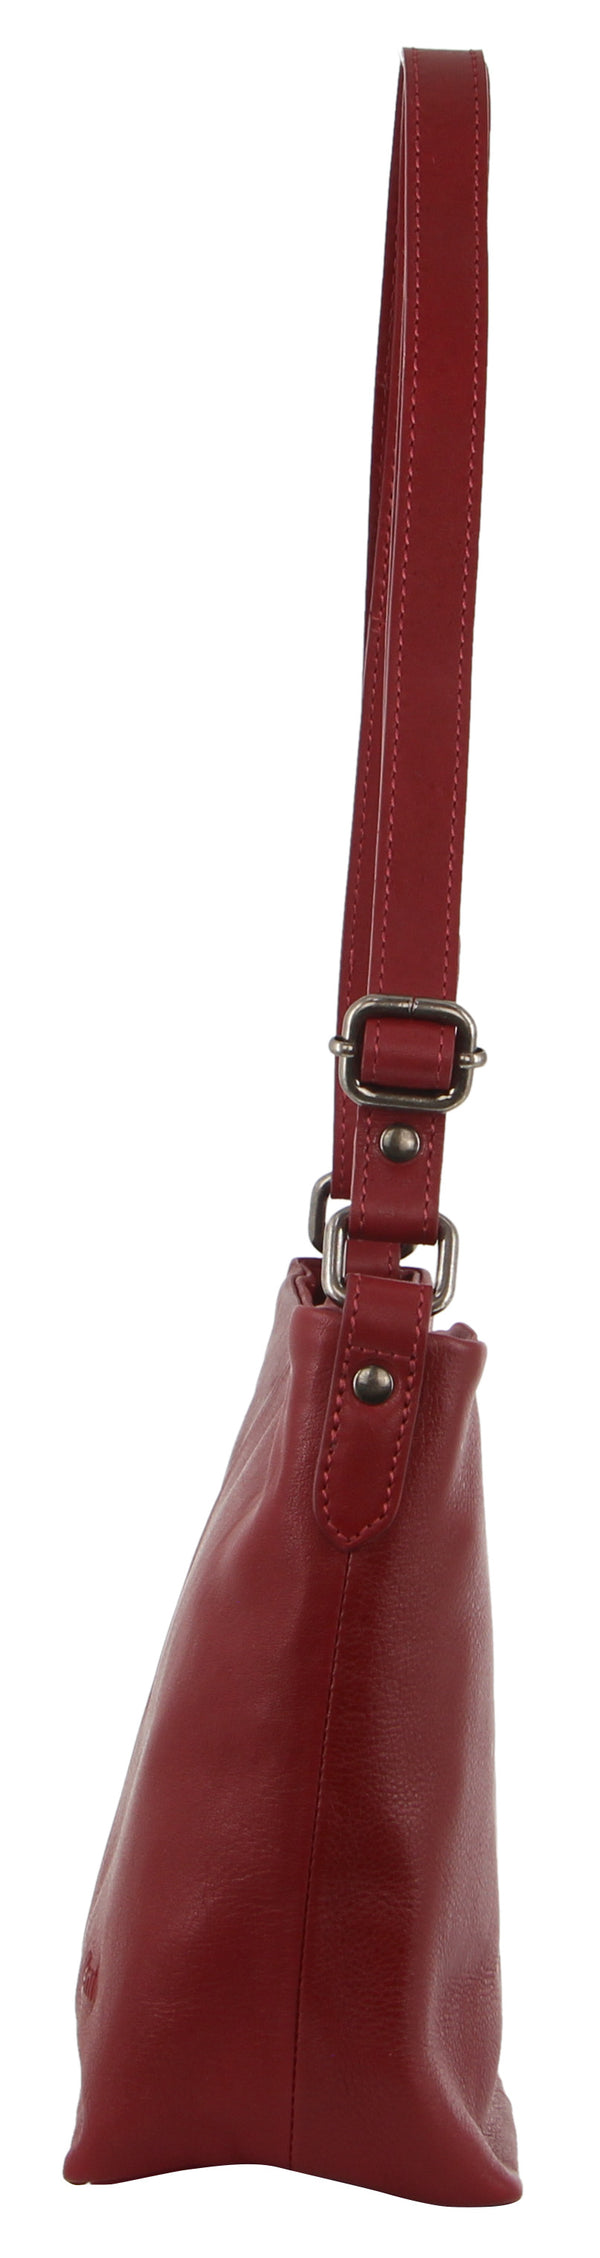 Milleni Ladies Nappa Leather Cross Body Bag  in Red (NL2789)